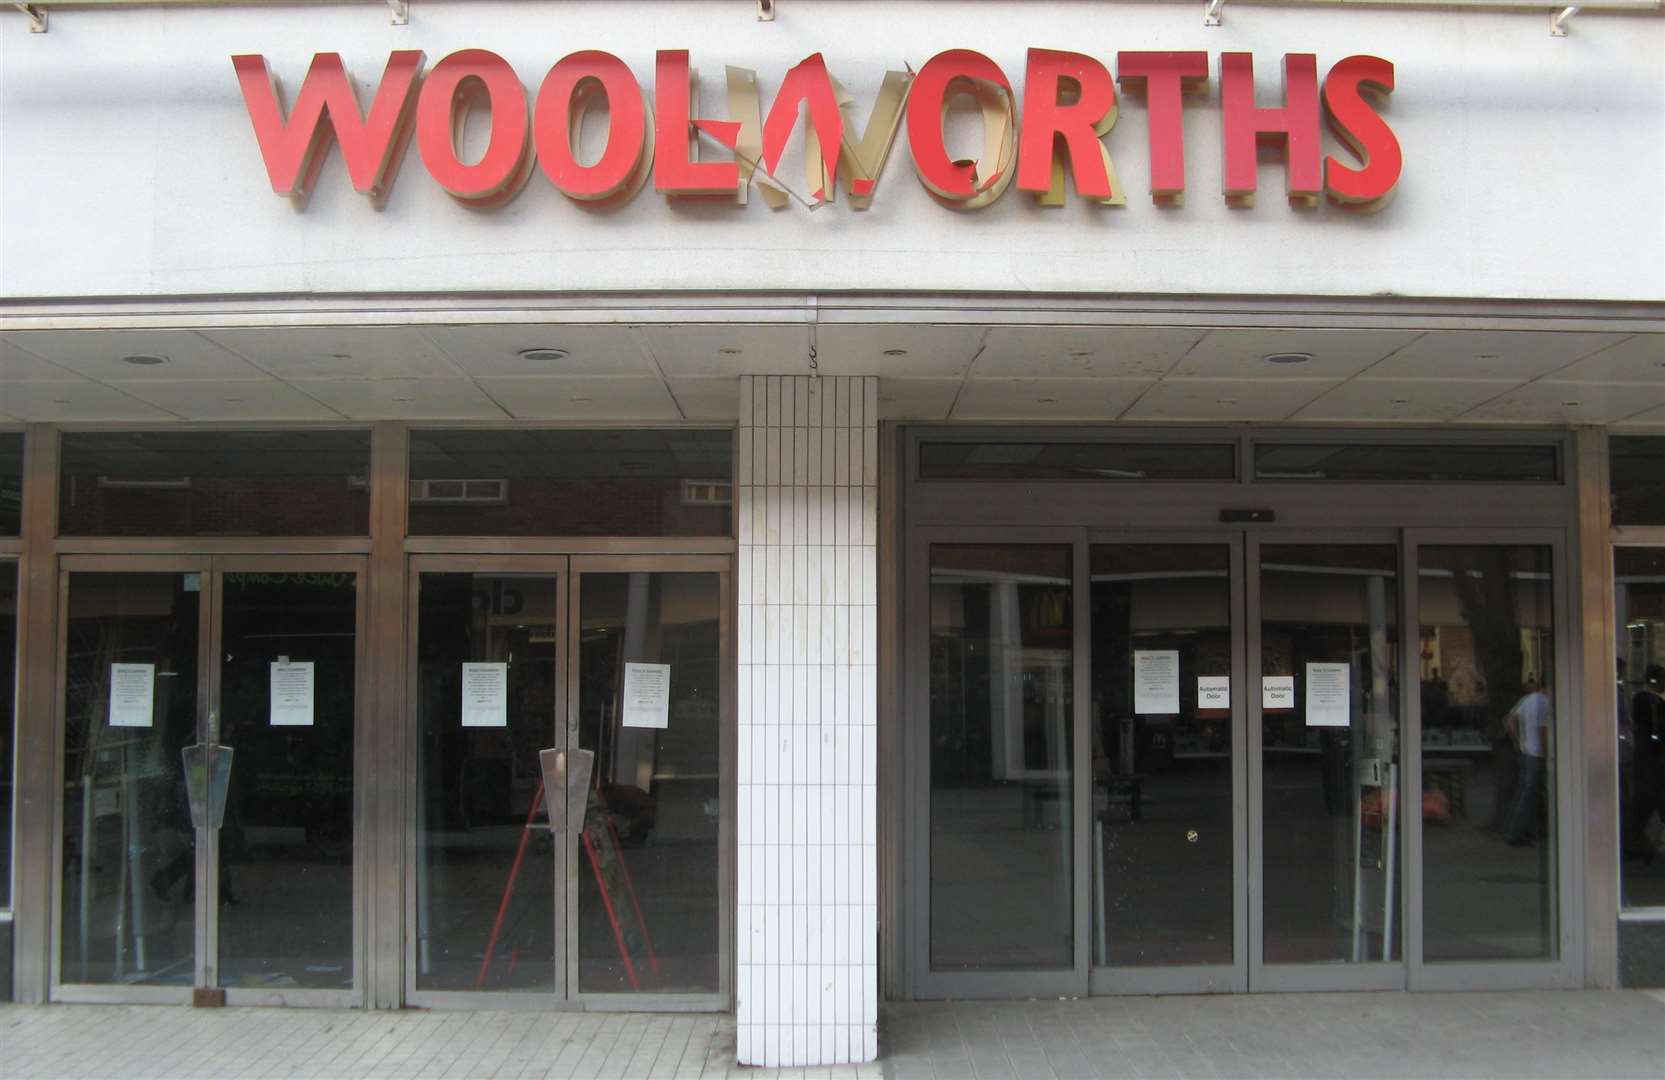 Would Woolworths survive if revived? Probably not...